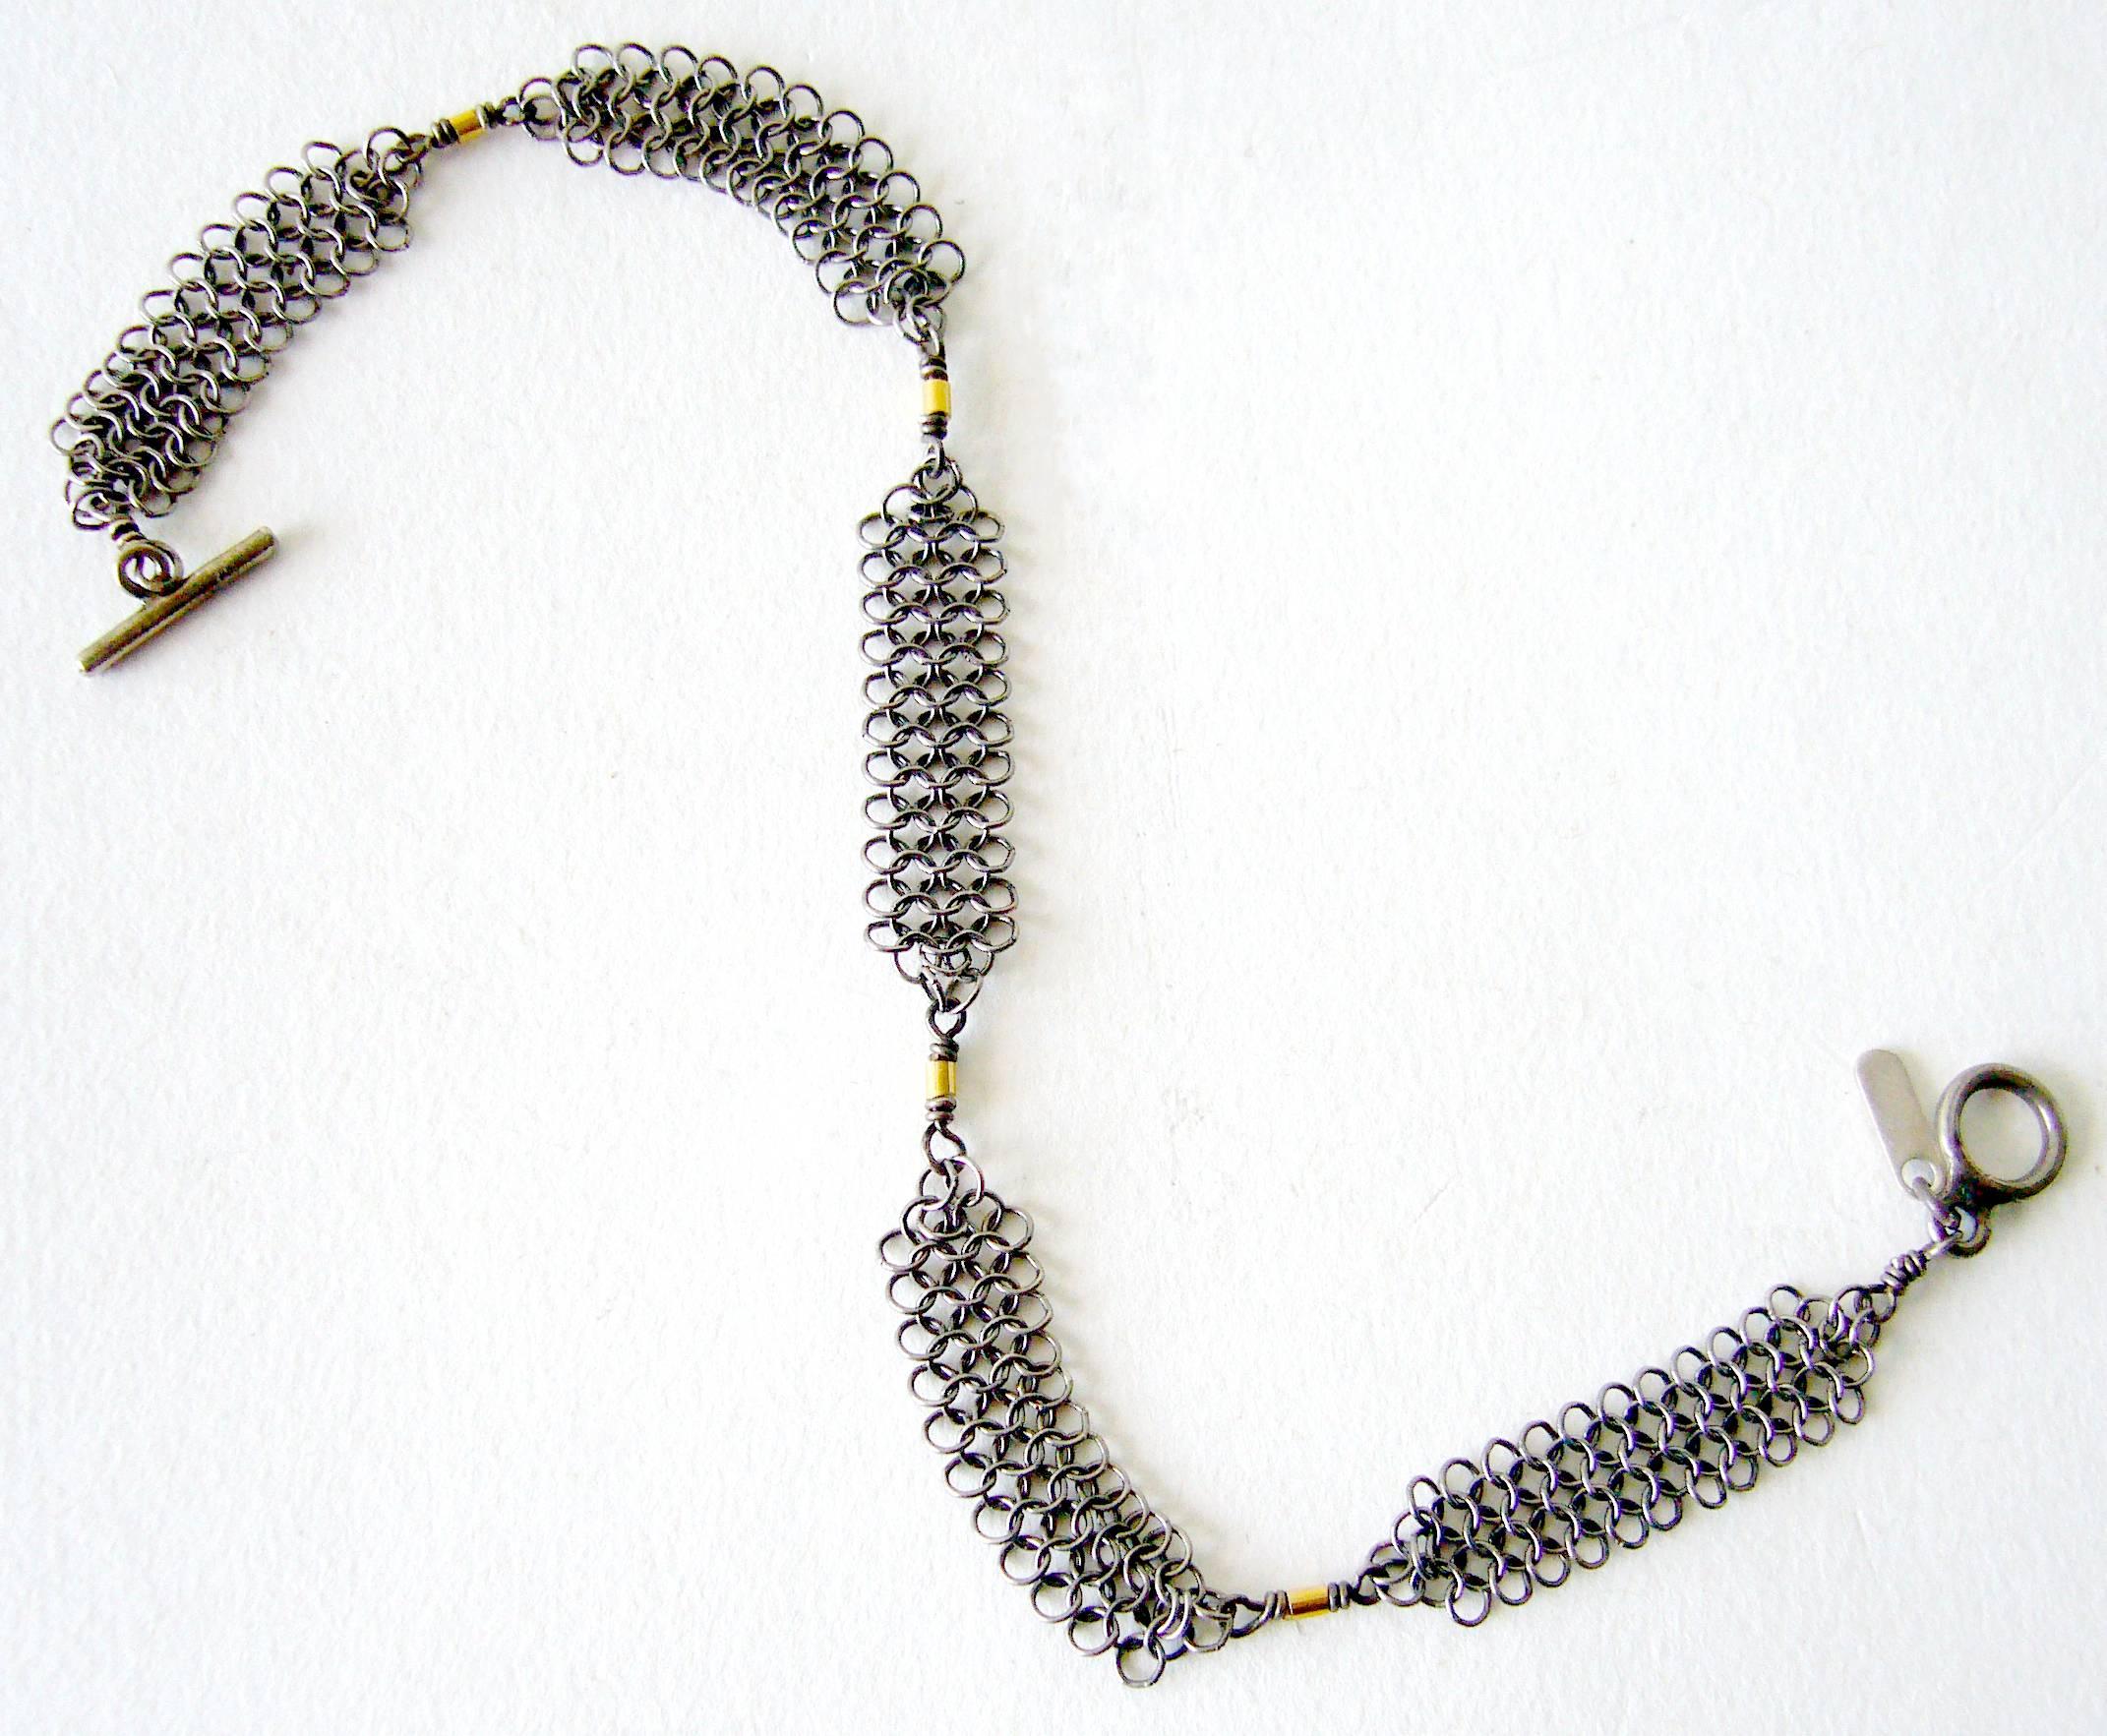 Sterling silver chain maille with 14k gold accent beads created by Allison Stern of San Francisco, California.  Bracelet measures 8" in length by .25" wide.  Signed on a sterling tag A. Stern.  In excellent vintage condition.  